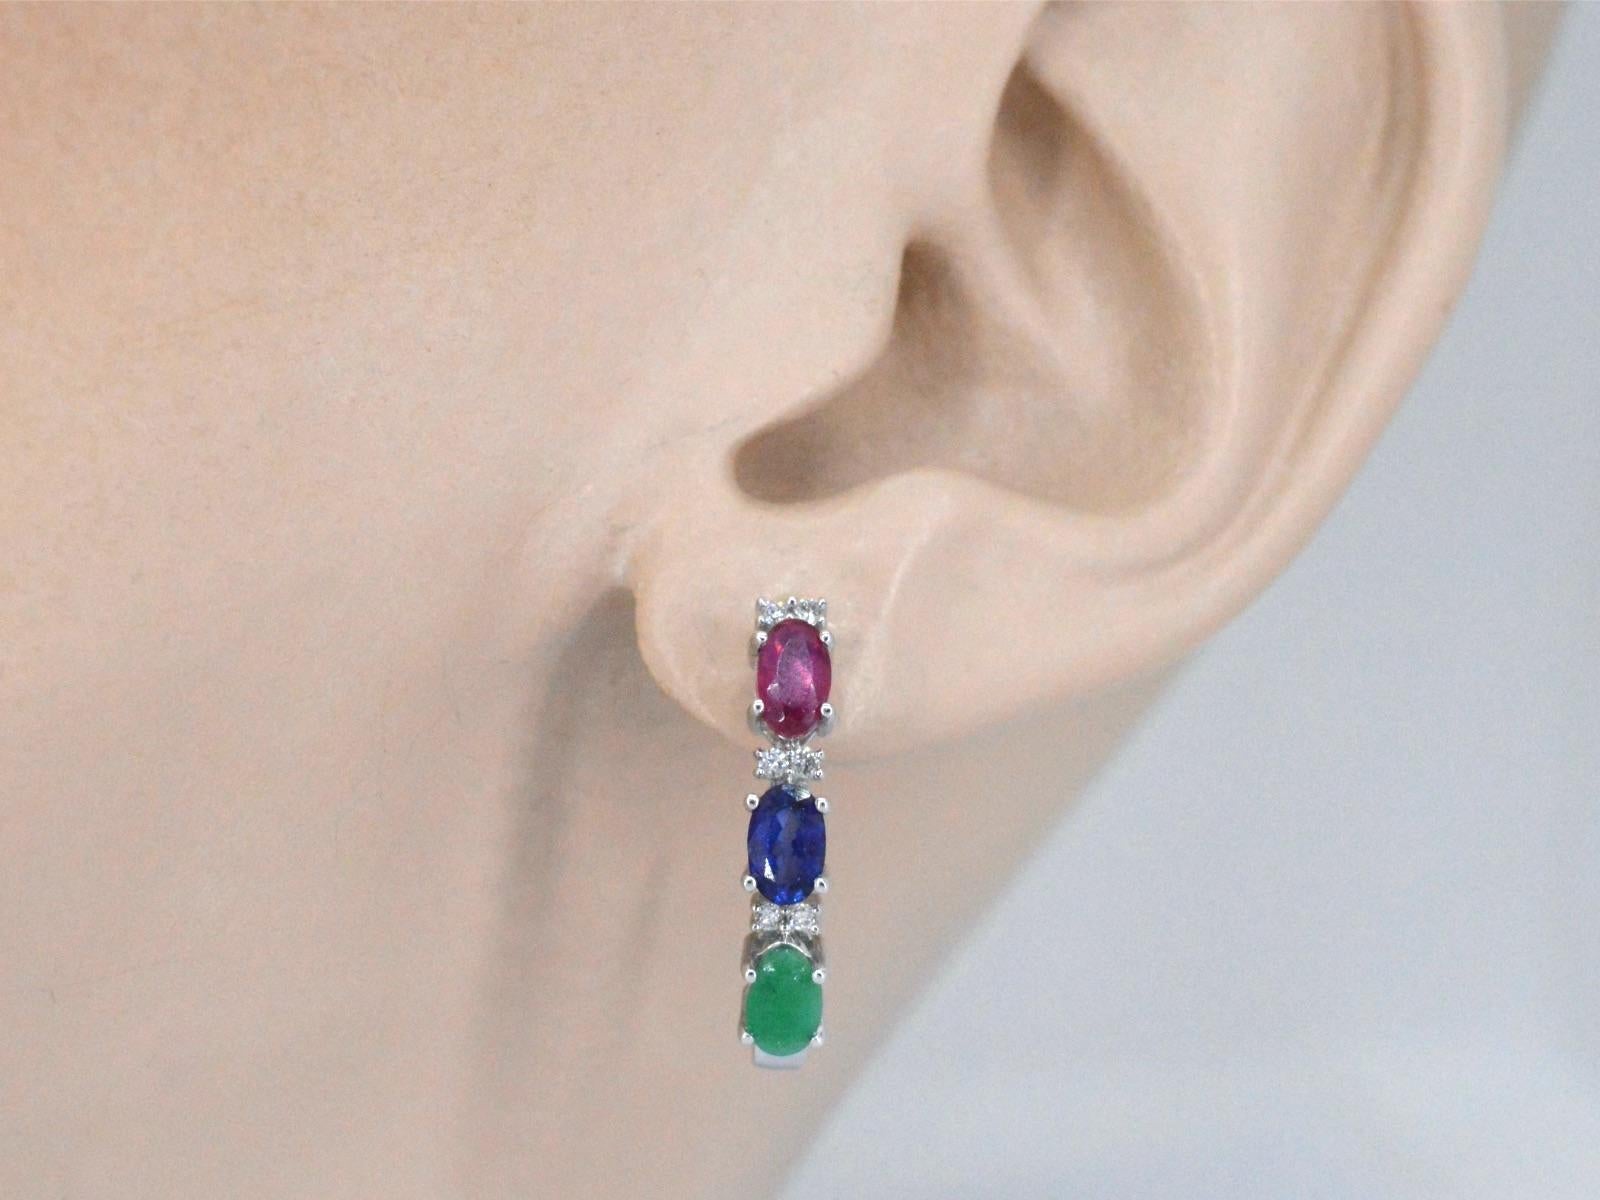 Diamonds: Naturally Shiny

Weight: 0.10 carat

Cut: Brilliant cut

Colour: F-G

Clarity: SI-P

Quality: Very good

Gemstones: Sapphire. Ruby and Emerald

Weight: 2.00 carats

Colour: Blue. Red and green

Clarity: With natural inclusions

Cut: Oval